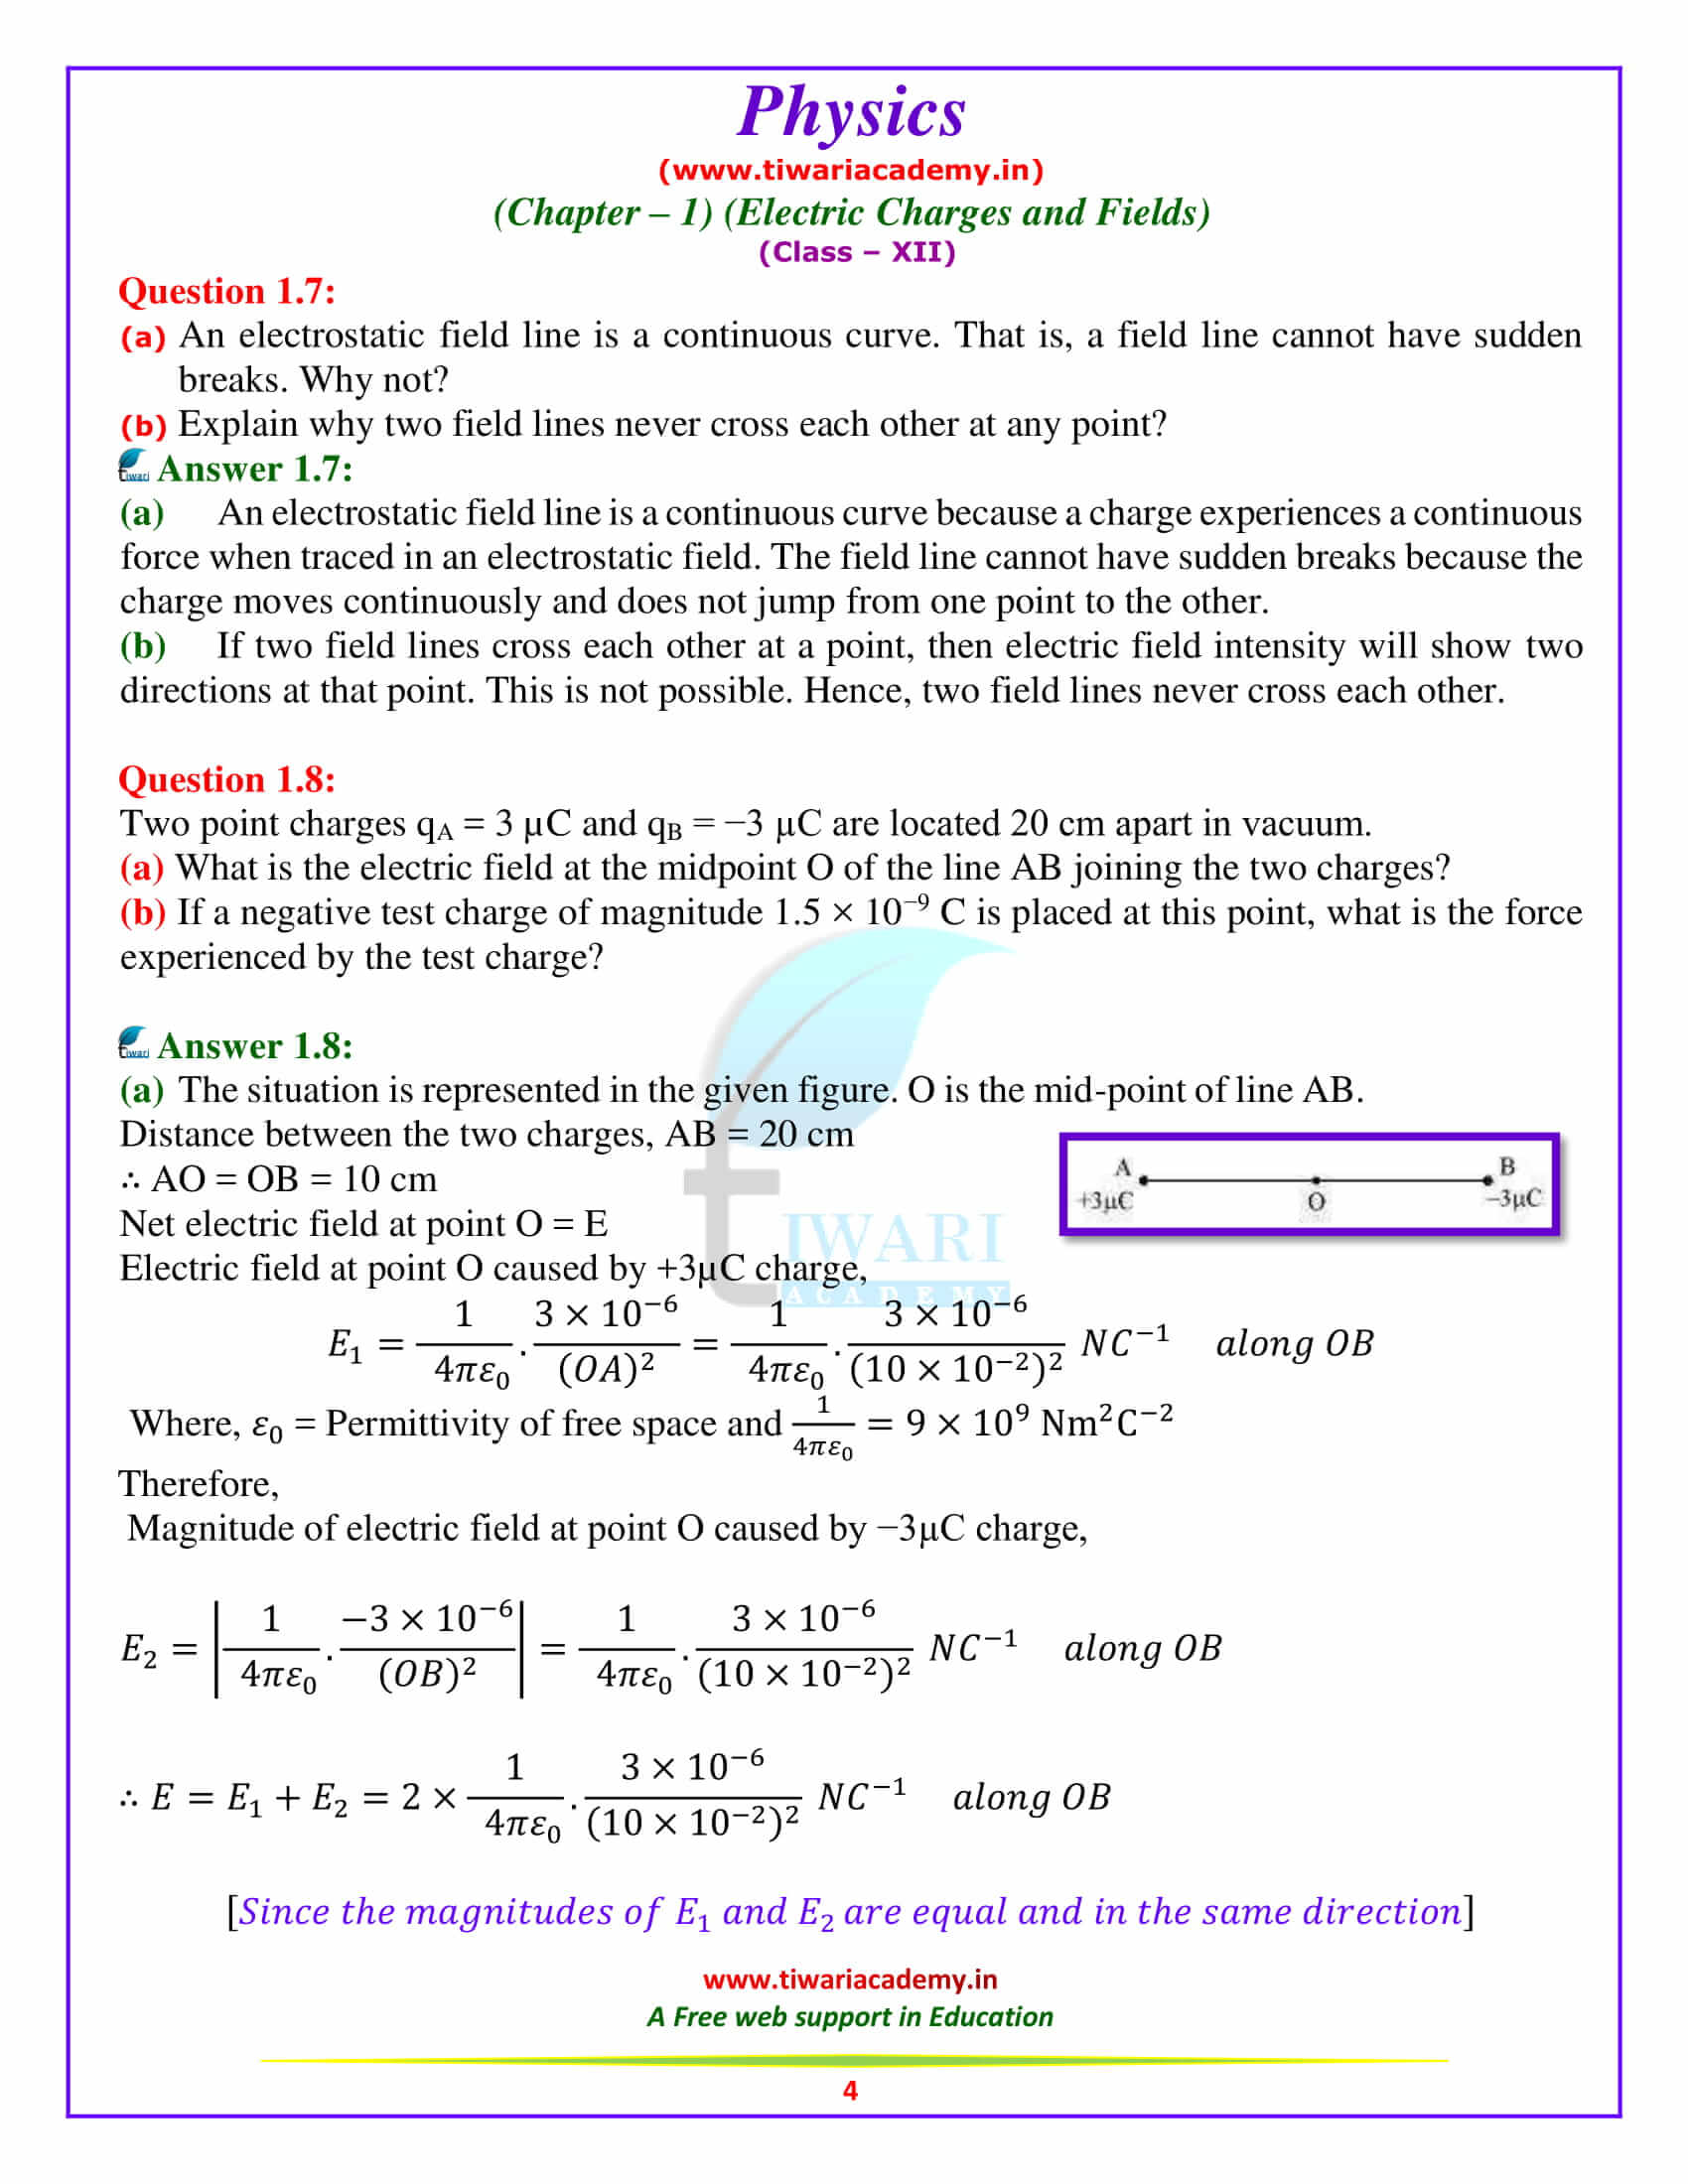 NCERT Solutions for Class 12 Physics Chapter 1 in pdf form